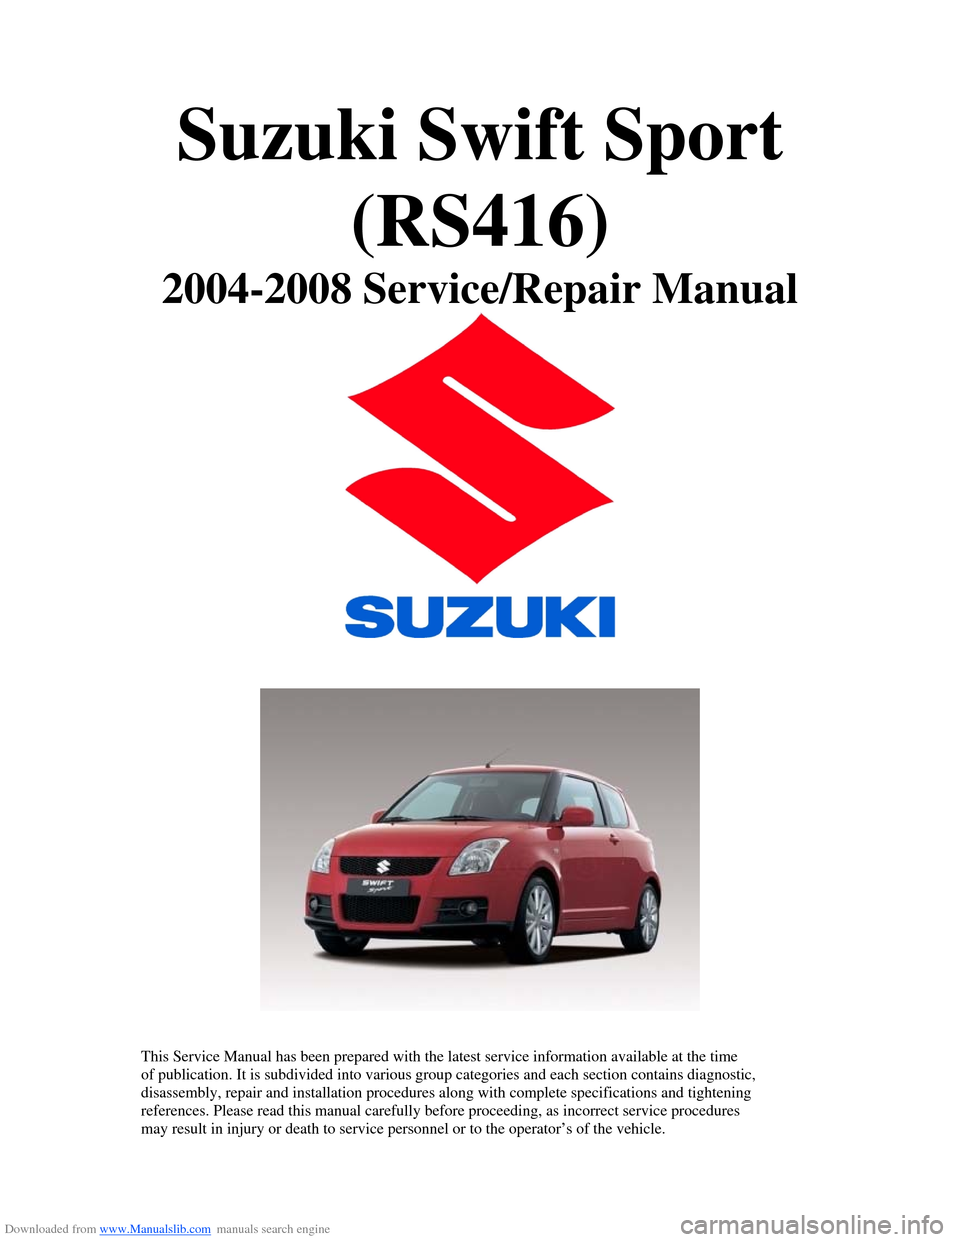 SUZUKI SWIFT 2007 2.G Service Workshop Manual Downloaded from www.Manualslib.com manuals search engine Suzuki Swift Sport (RS416) 
2004-2008 Service/Repair Manual 
 
 
  
 
This Service Manual has been prepared with the latest service information